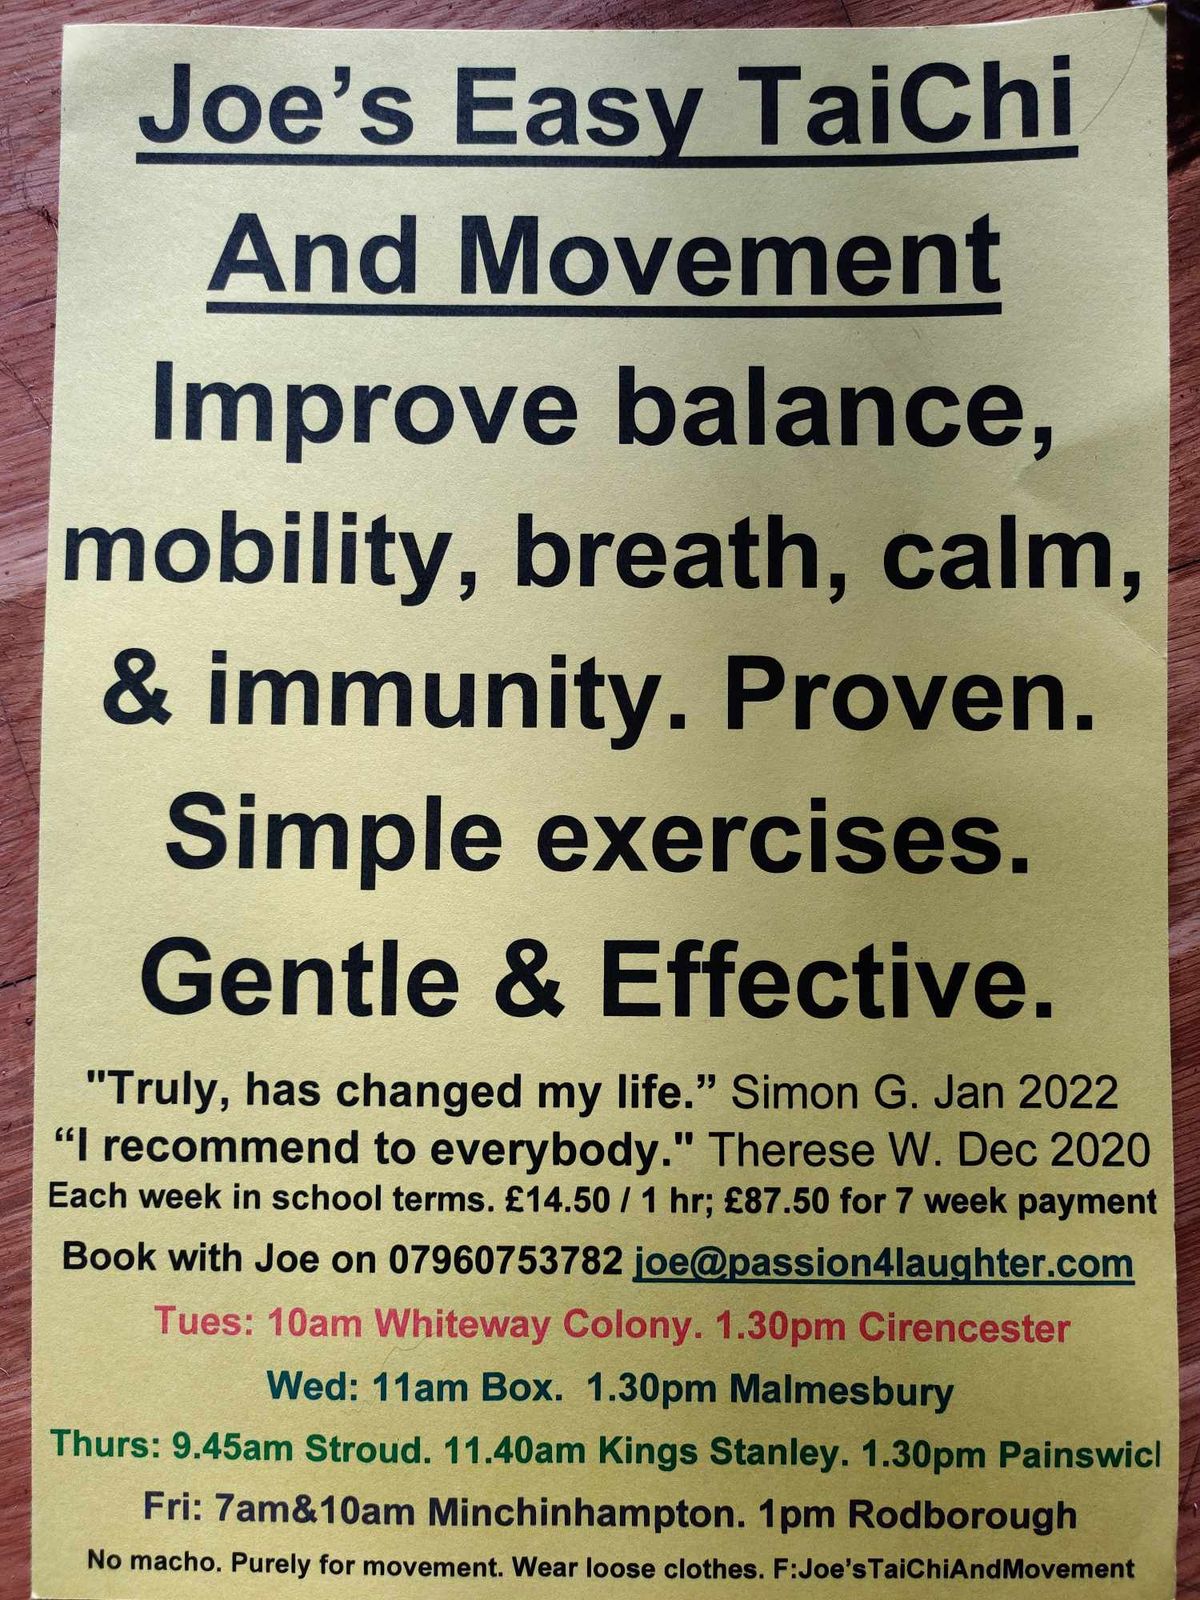 Joe's Easy TaiChi And Movement. Stroud, Stonehouse, Rodborough, Painswick, K.Stanley, and more....